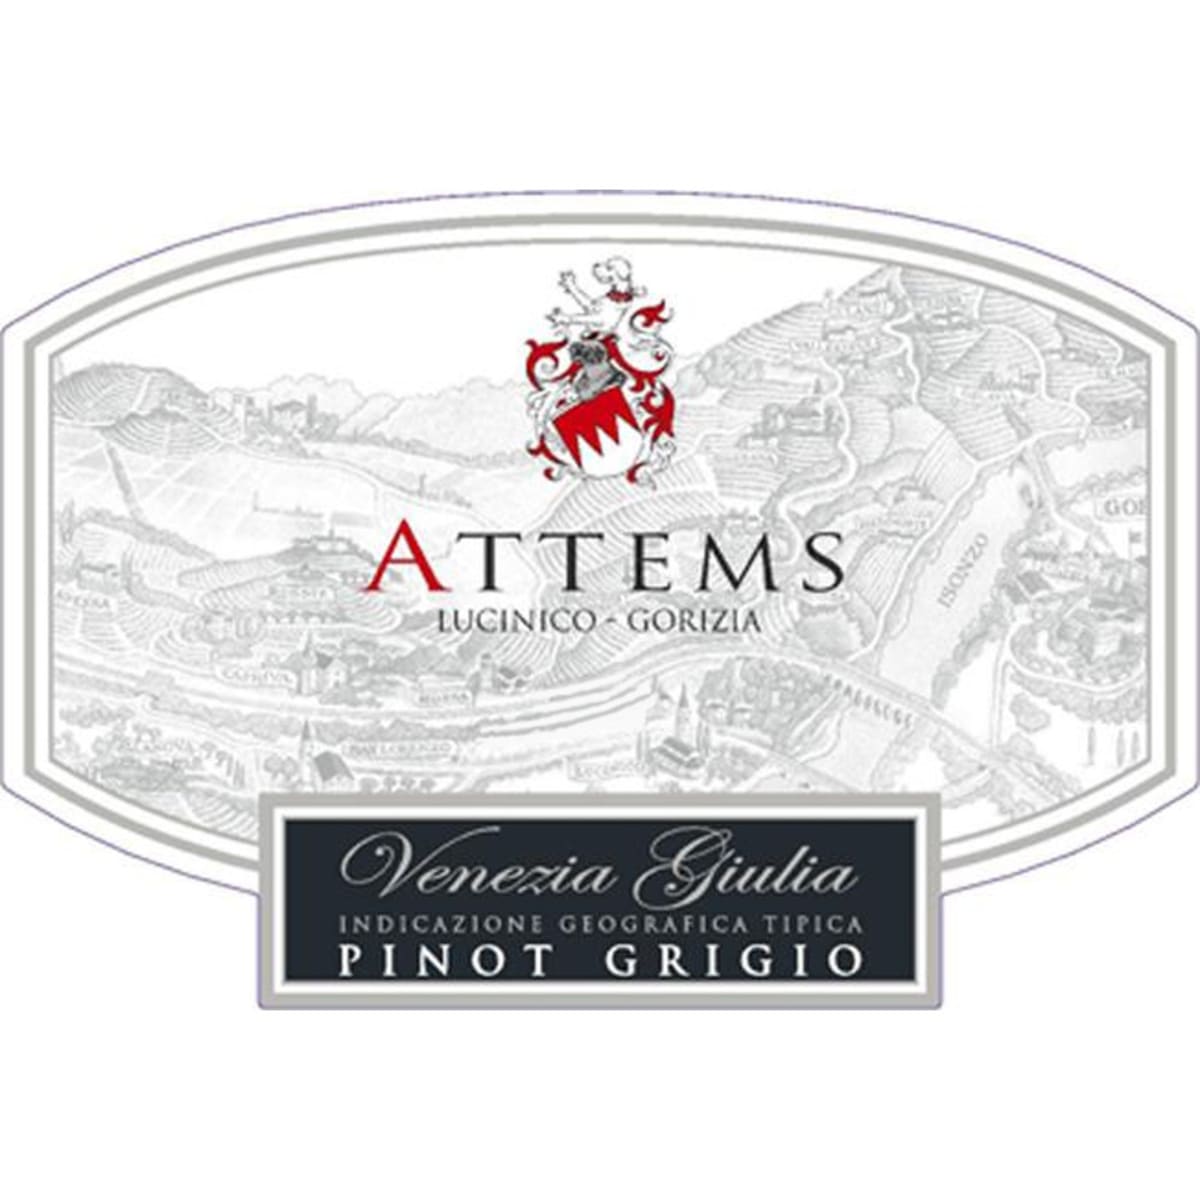 Attems Pinot Grigio 2009 Front Label